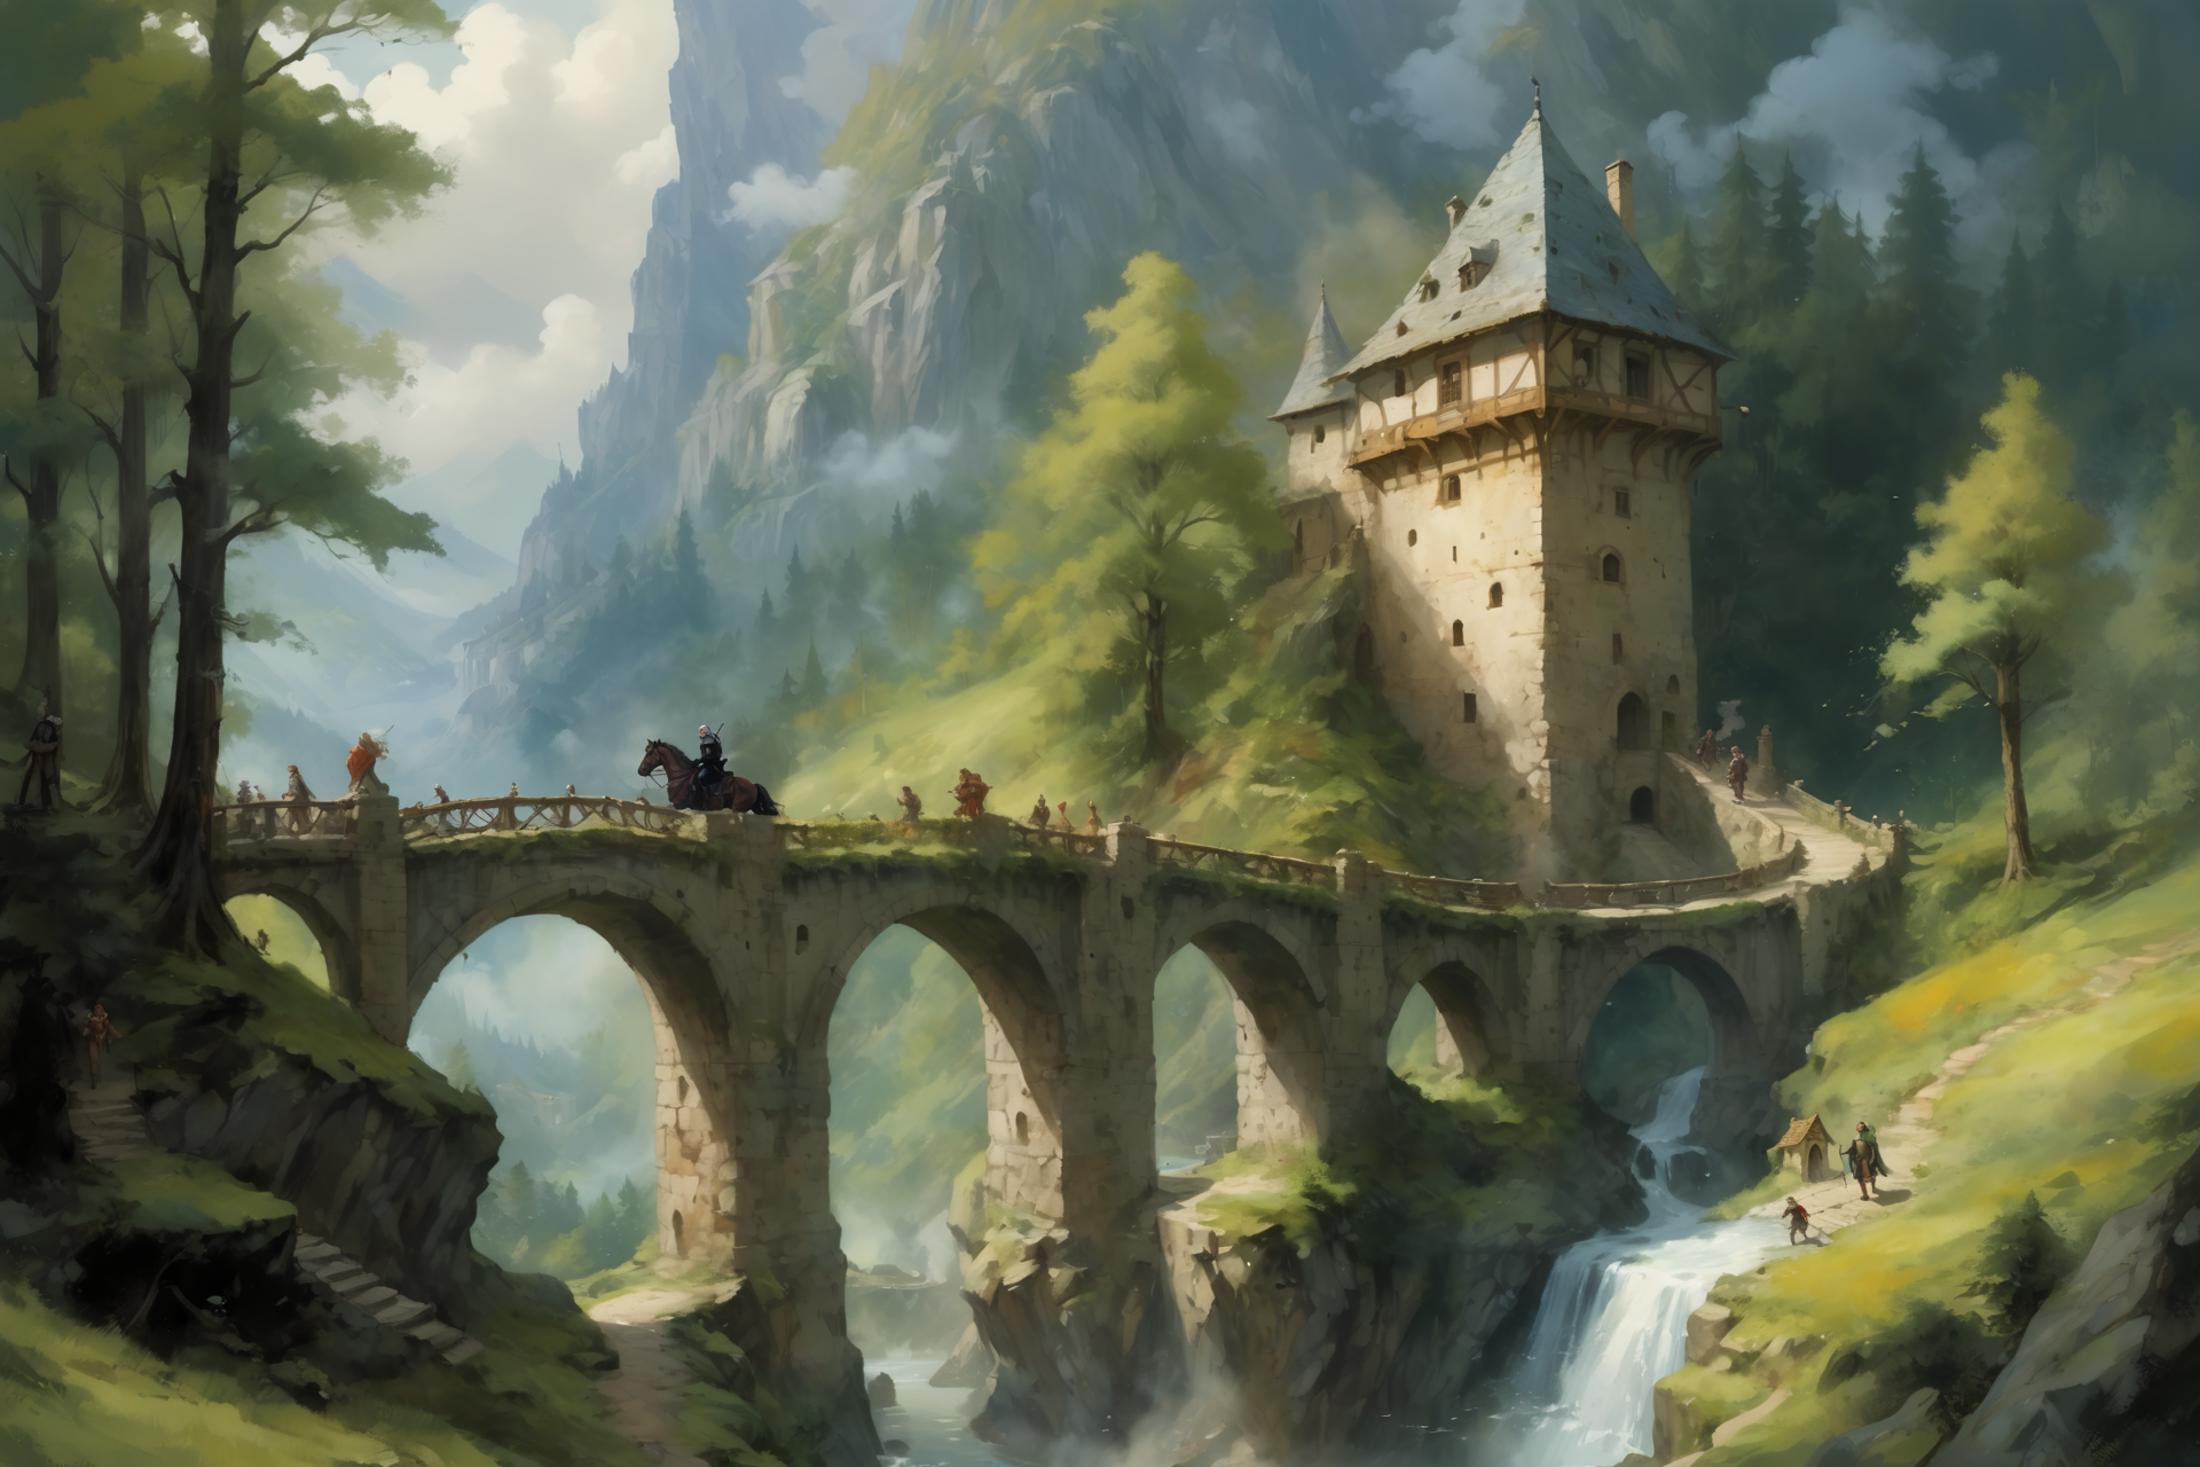 A Medieval Castle Bridge Over a River with People and Horses